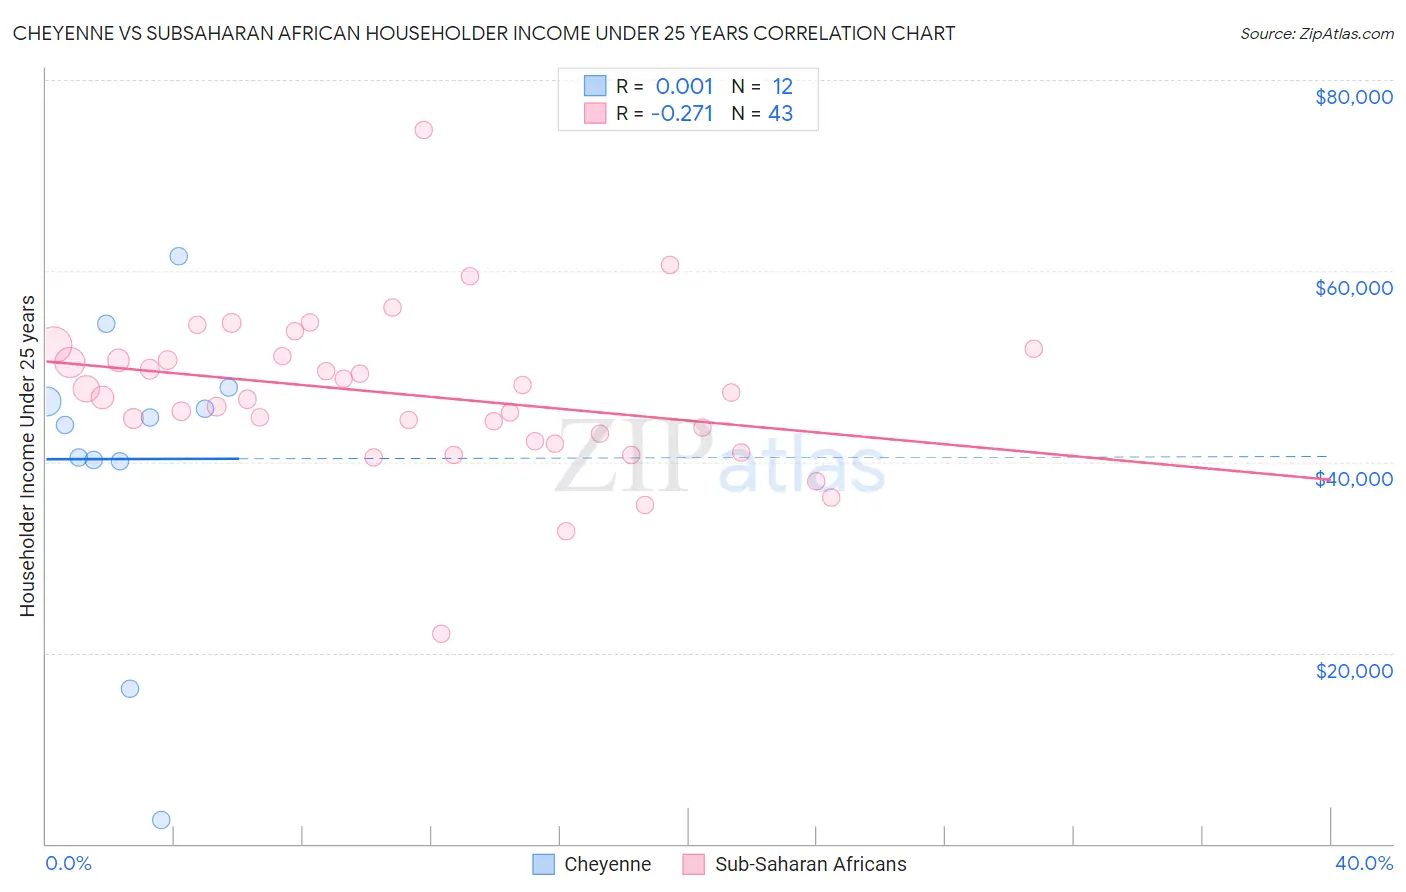 Cheyenne vs Subsaharan African Householder Income Under 25 years